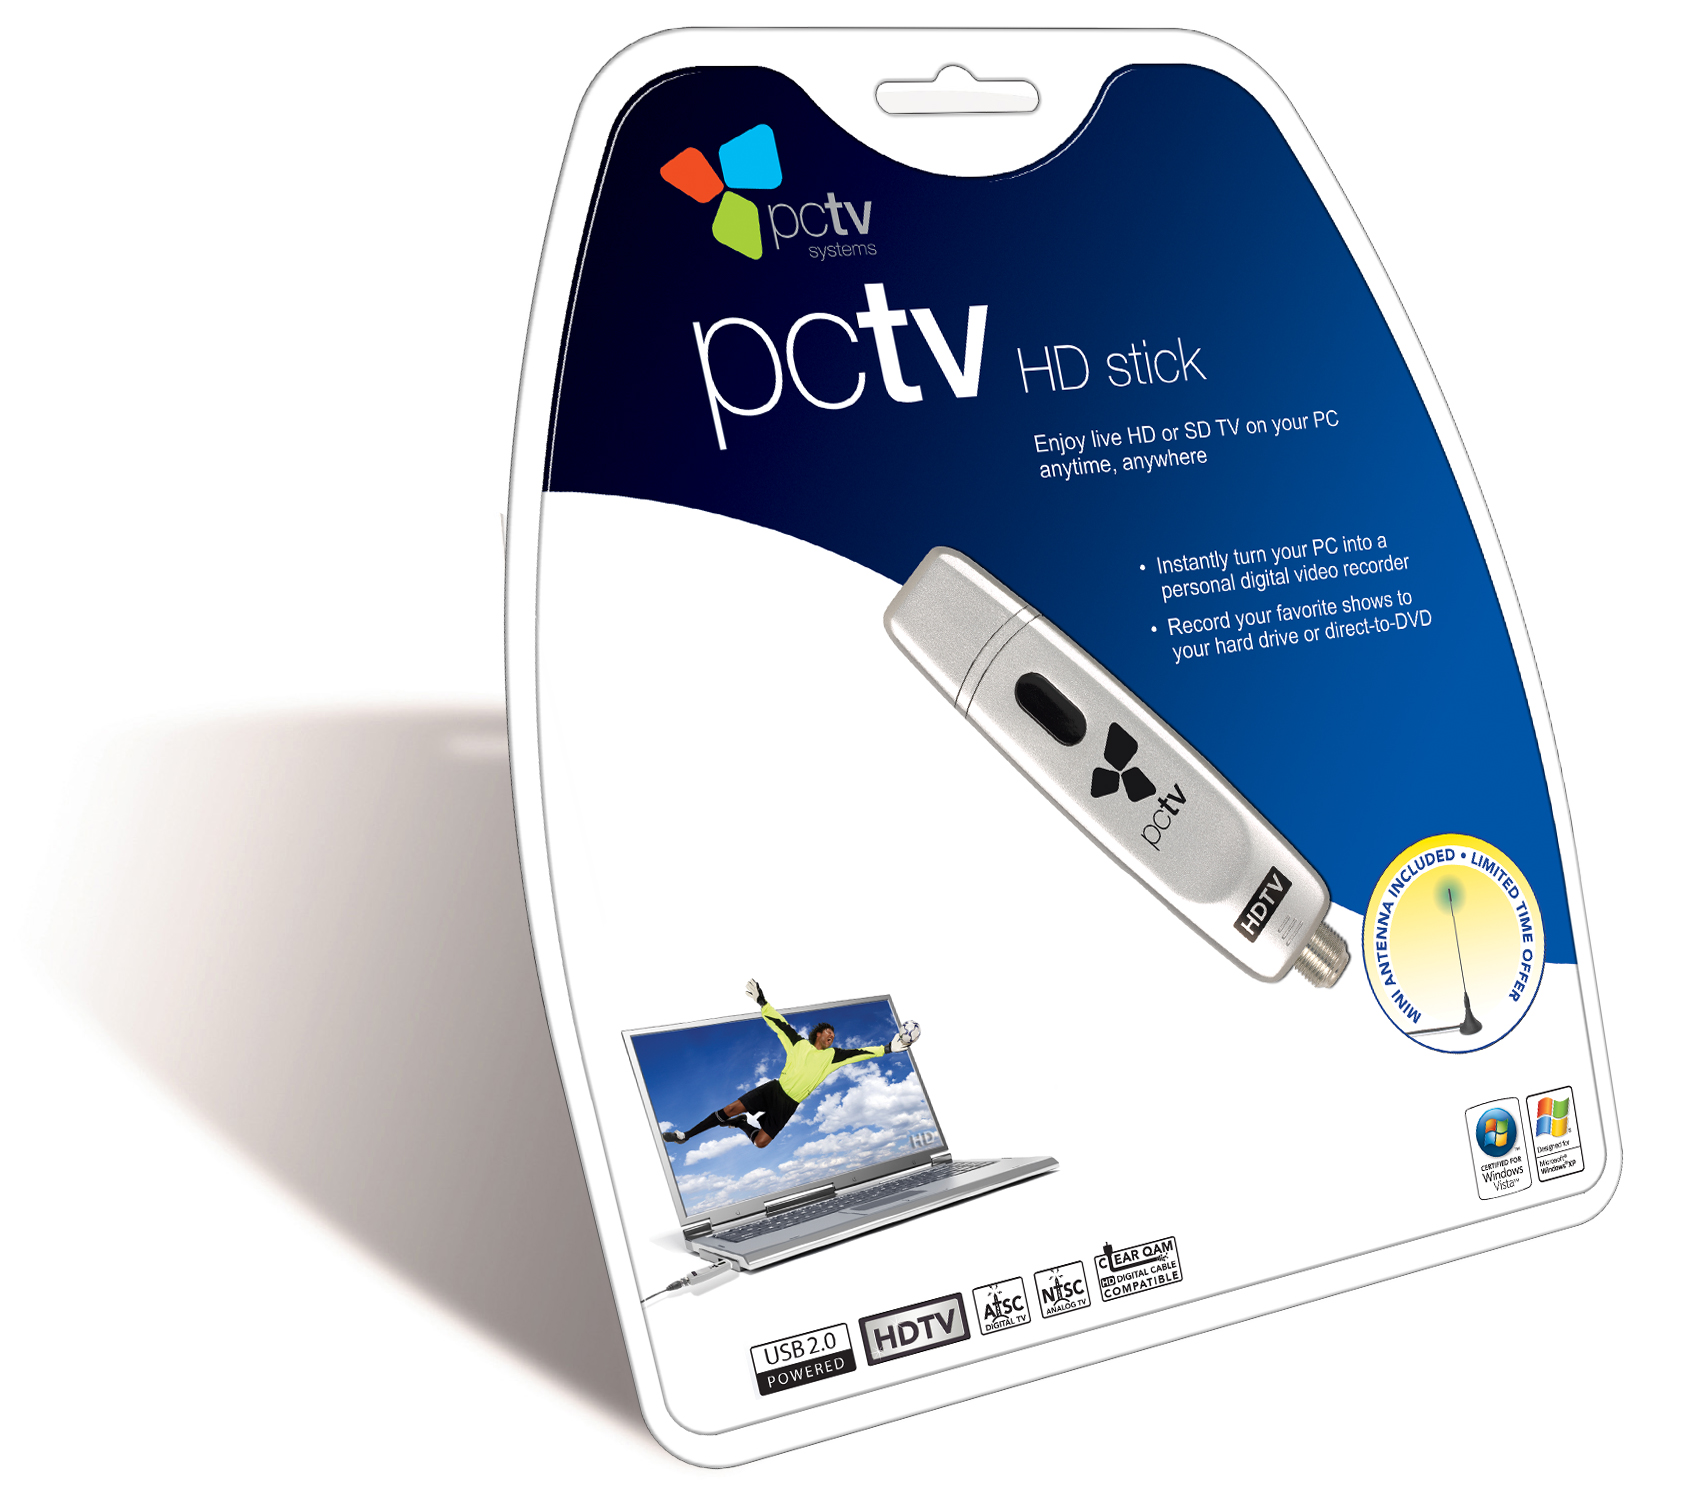 PCTV HD Stick Retail Package